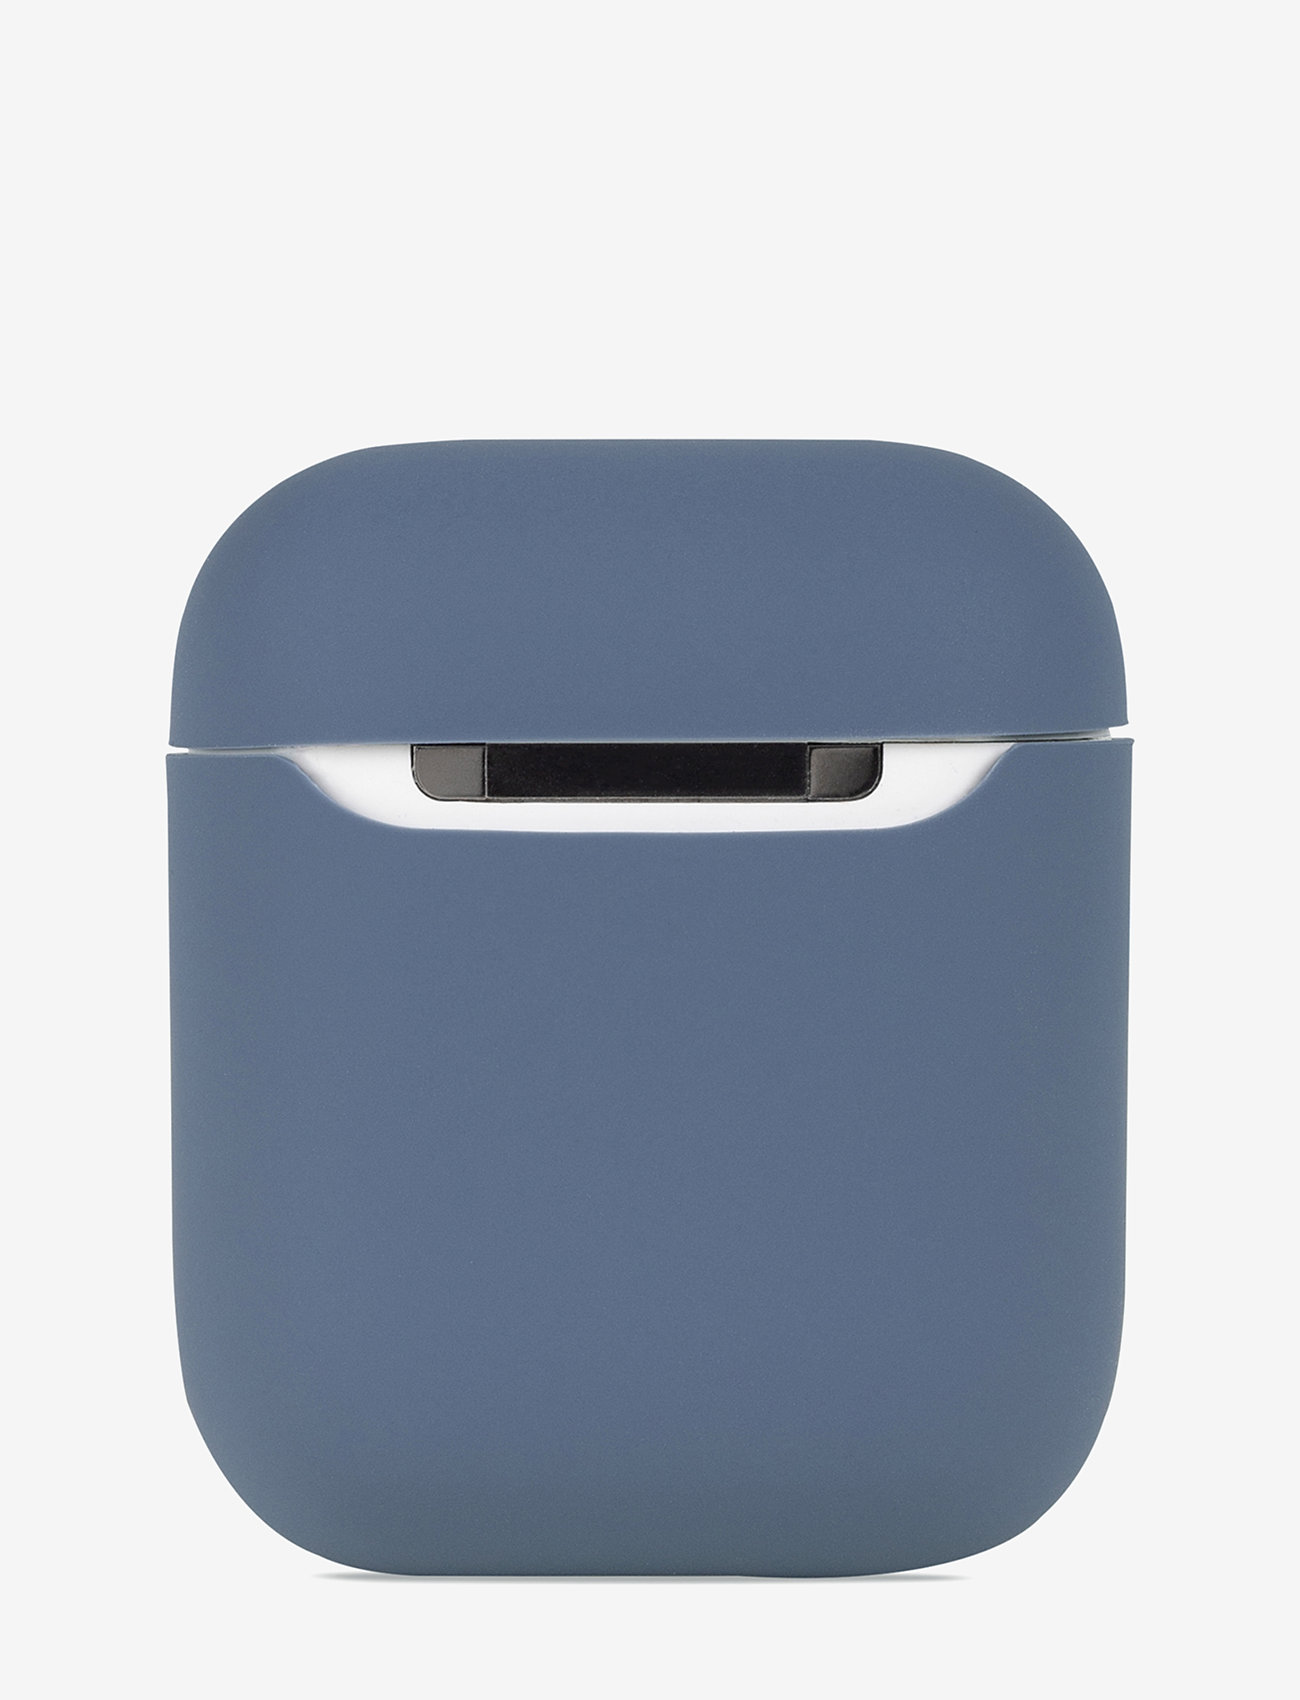 Holdit - Silicone Case AirPods - laveste priser - nygård pacific blue - 1